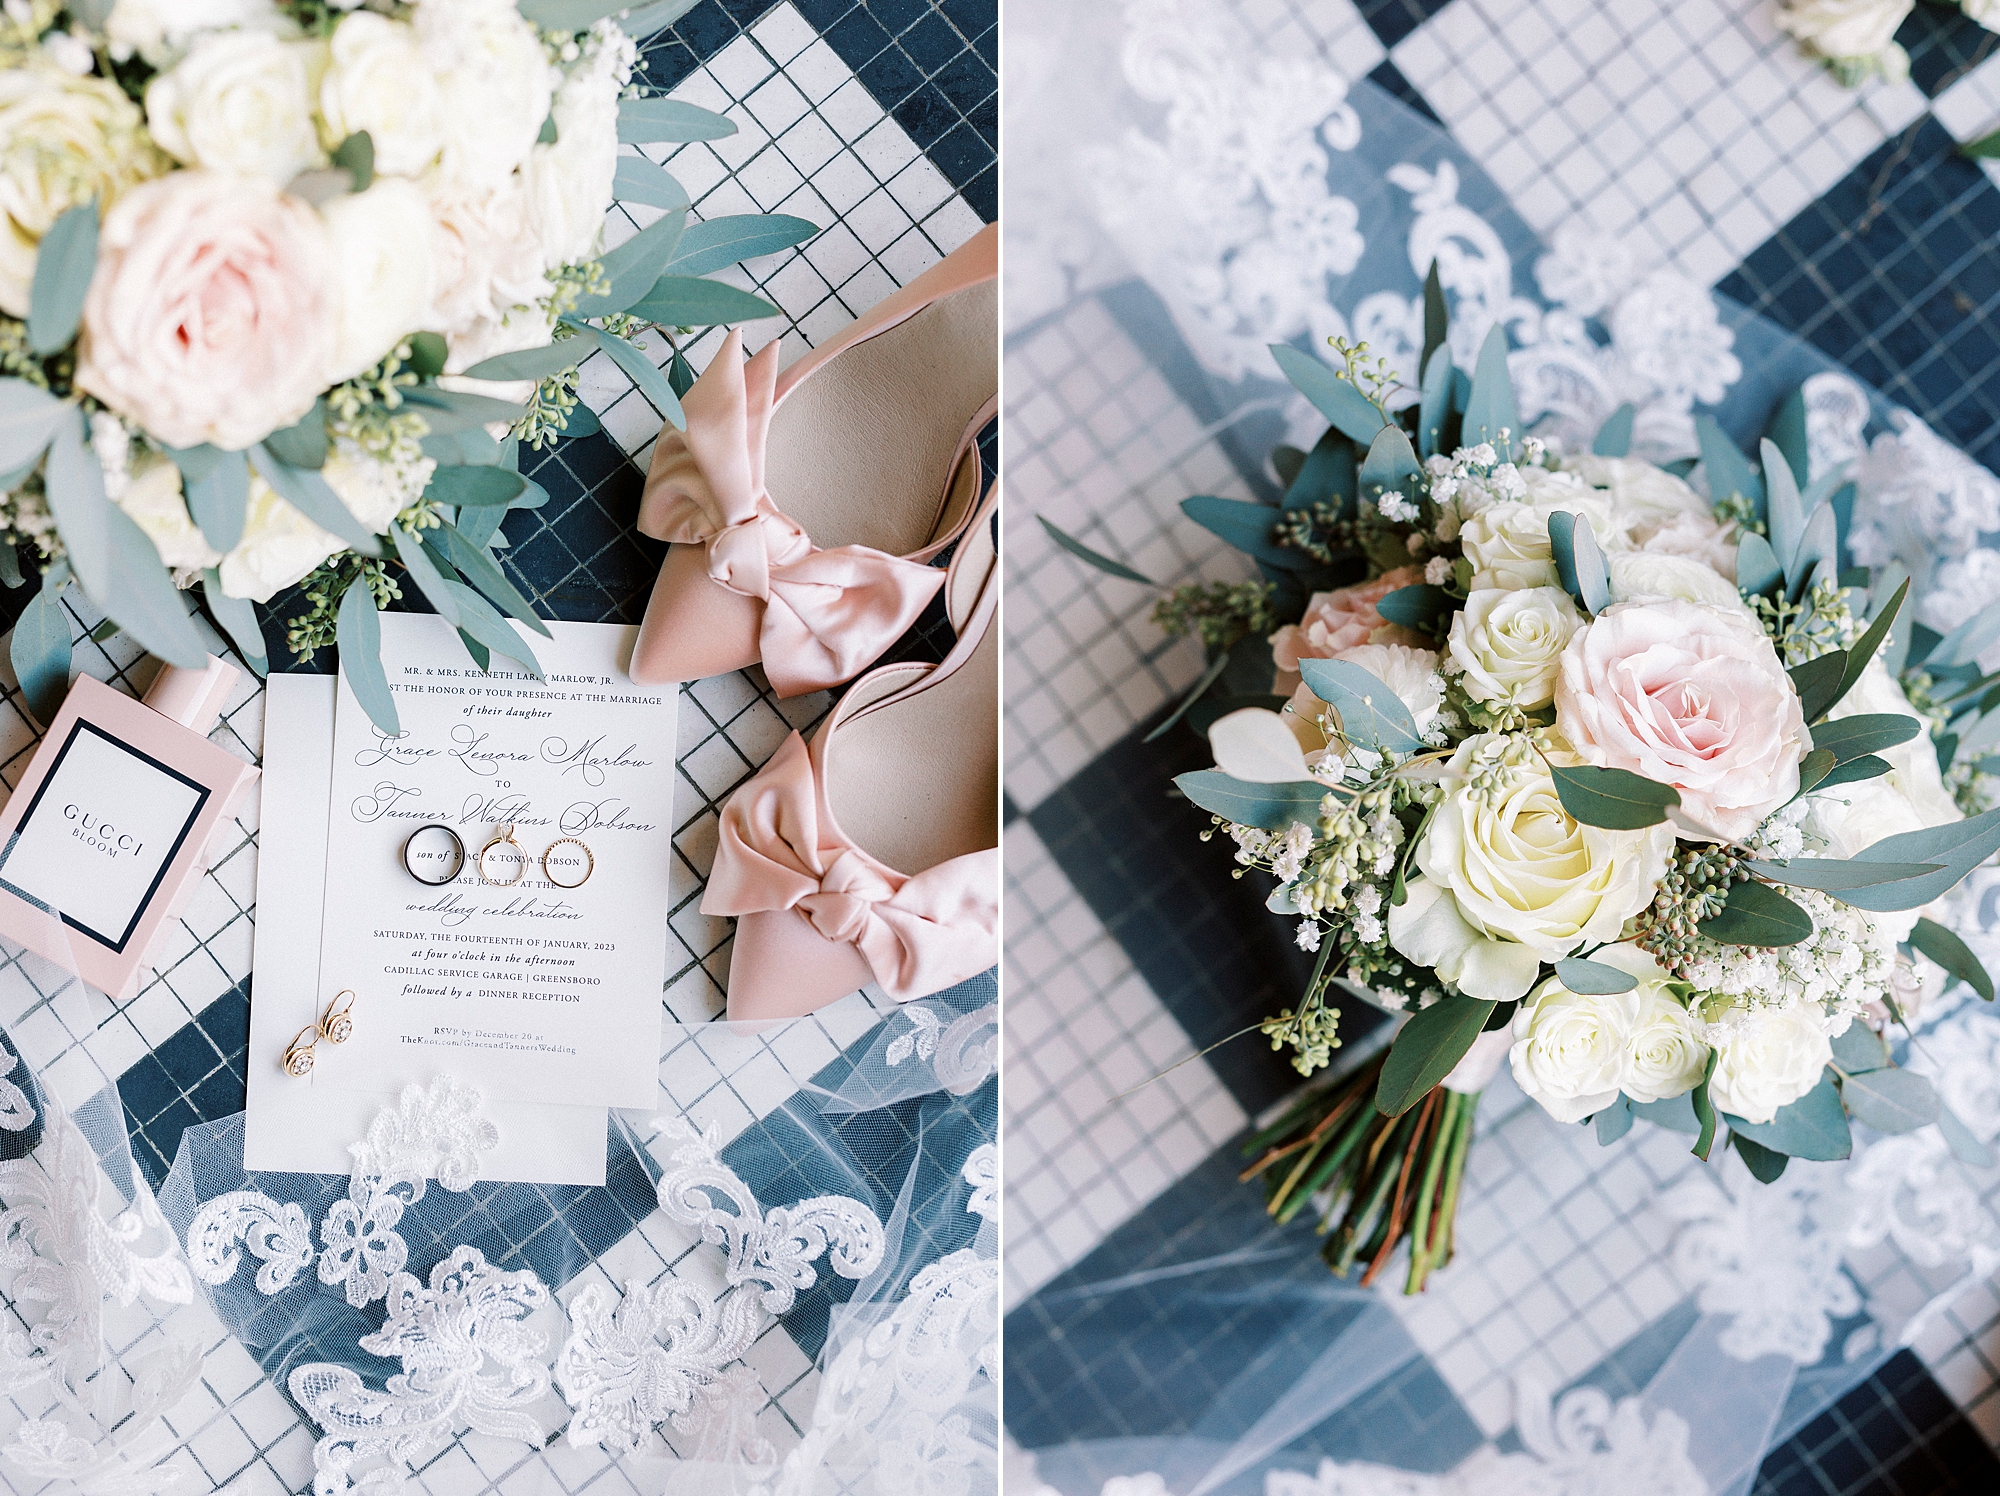 bride's shoes, invitation, and bouquet for Cadillac Service Garage wedding